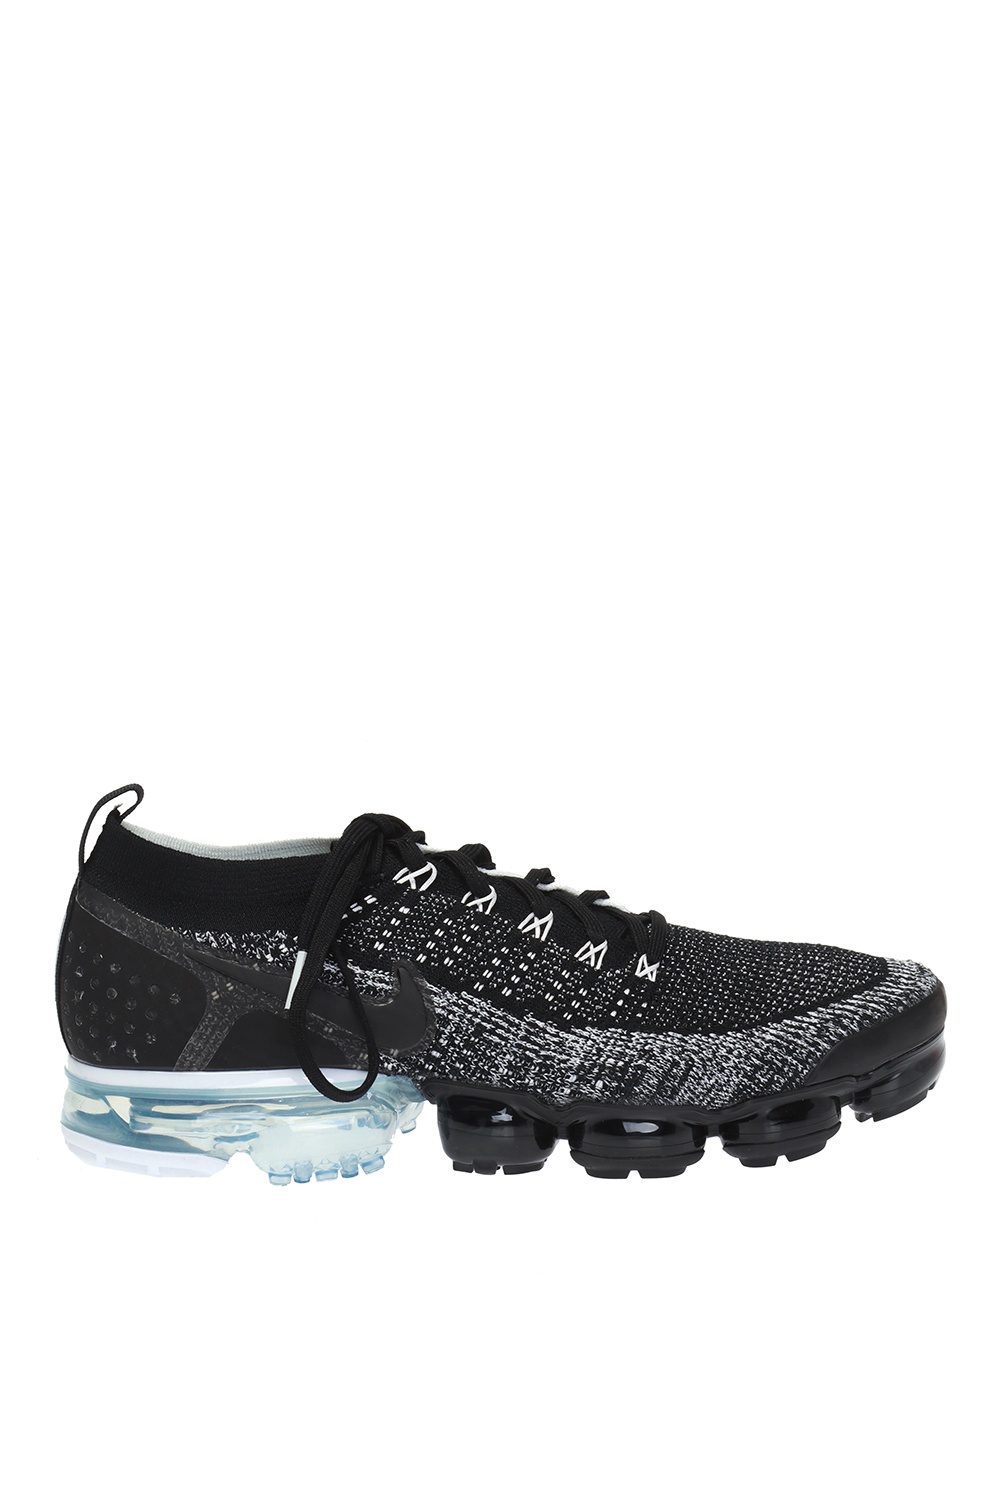 vapormax 2 black and white